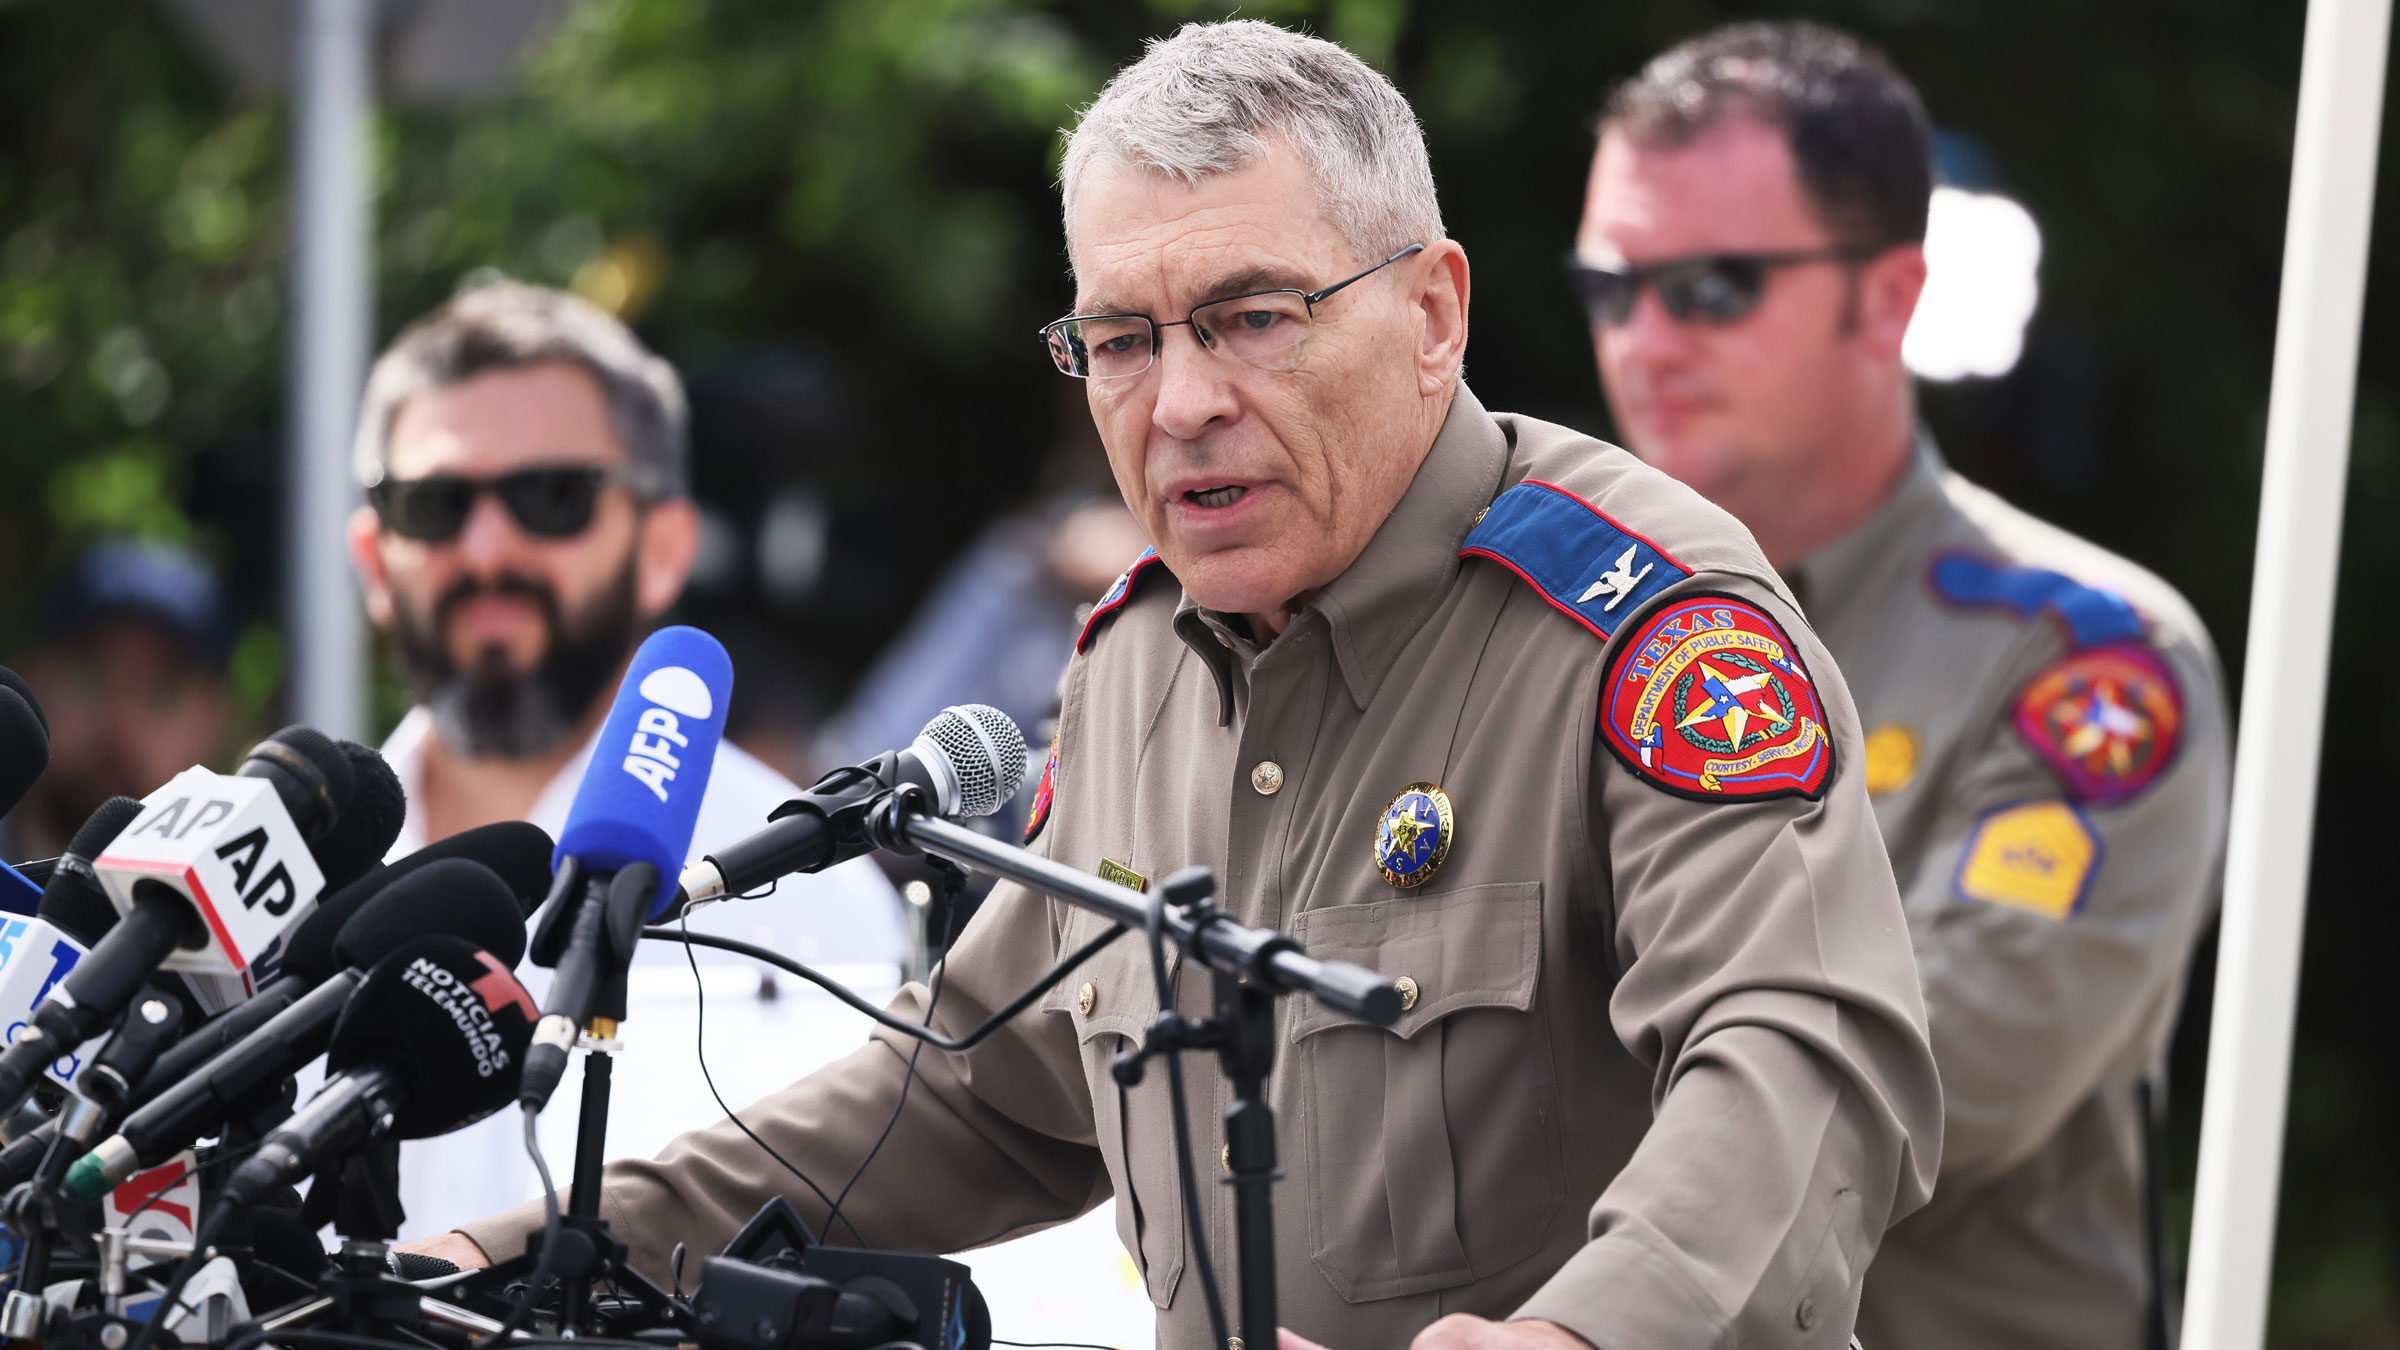 Texas Department of Public Safety Col. Steven McCraw acknowledged errors in the police response to the mass shooting in Uvalde, Texas, last month.